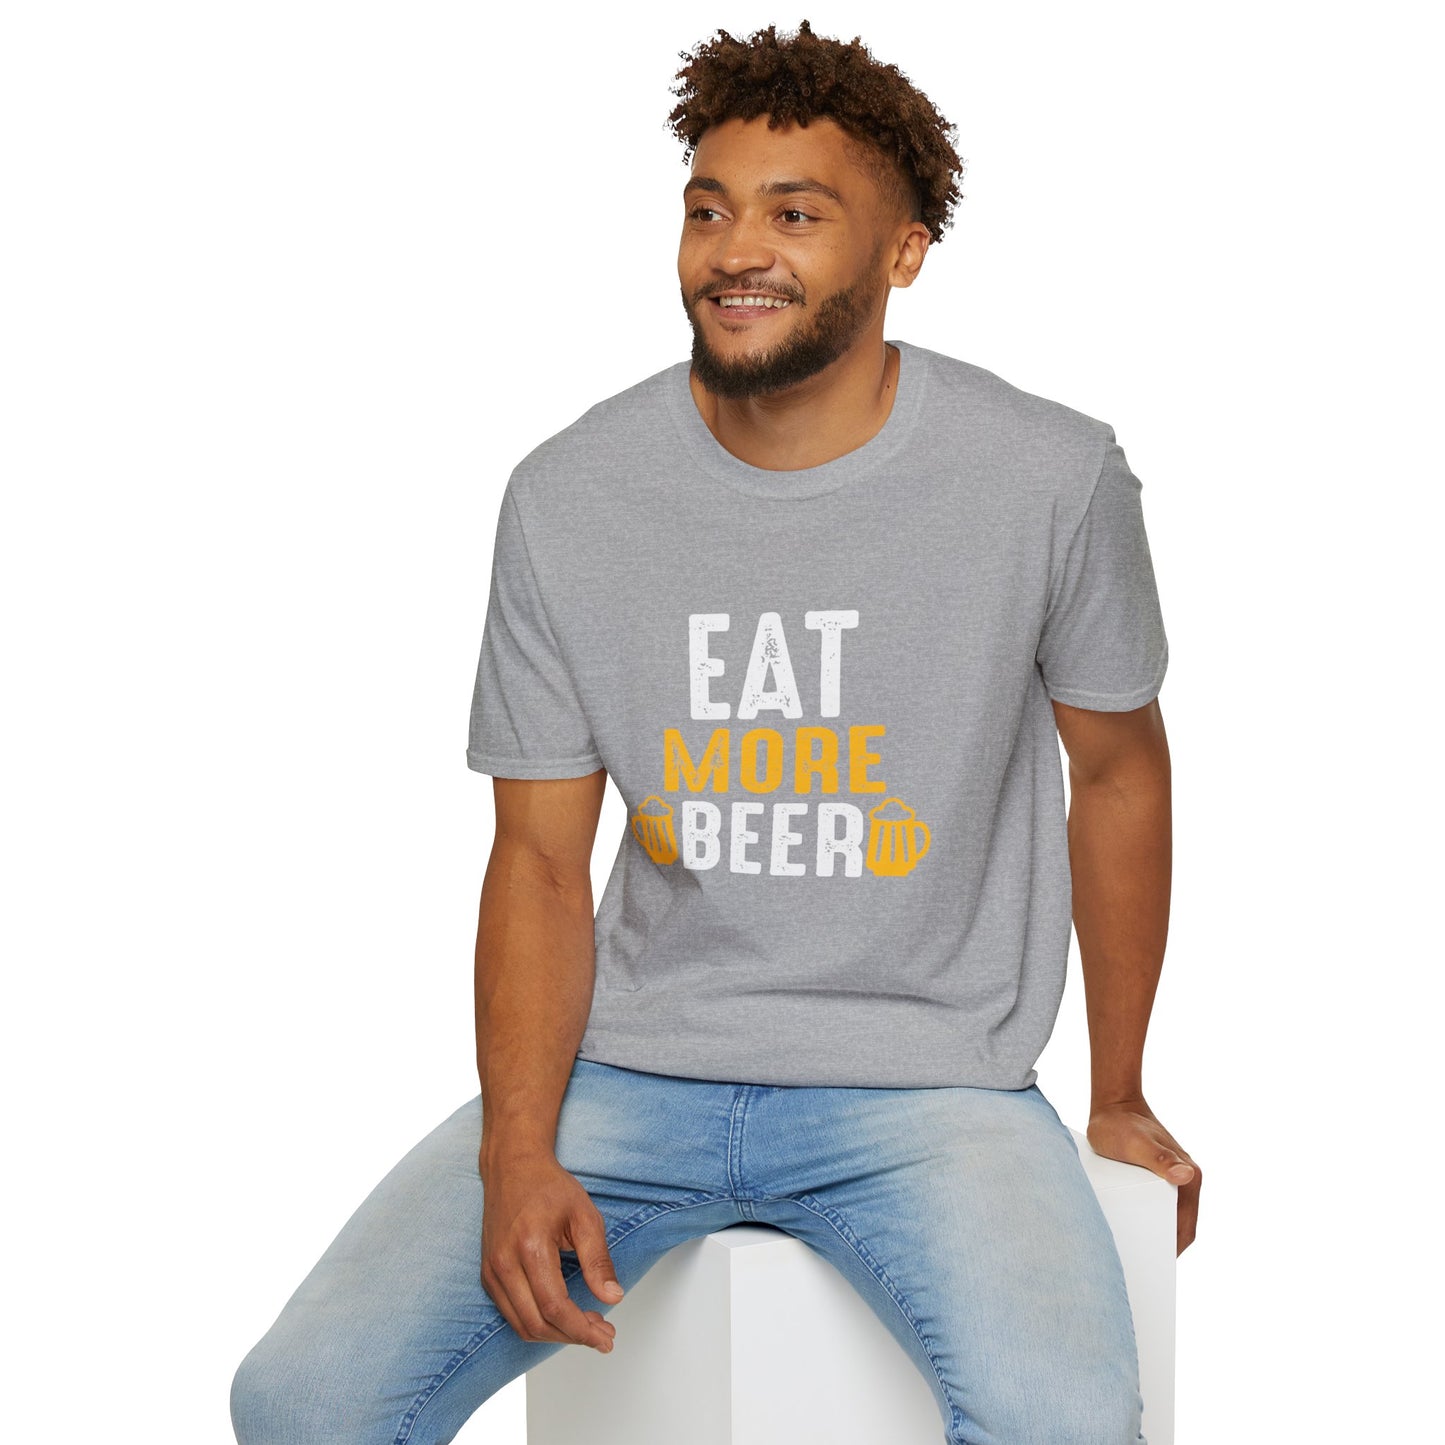 Cheers to Style: Embrace the Brew with Our 'Eat More Beer' T-Shirt